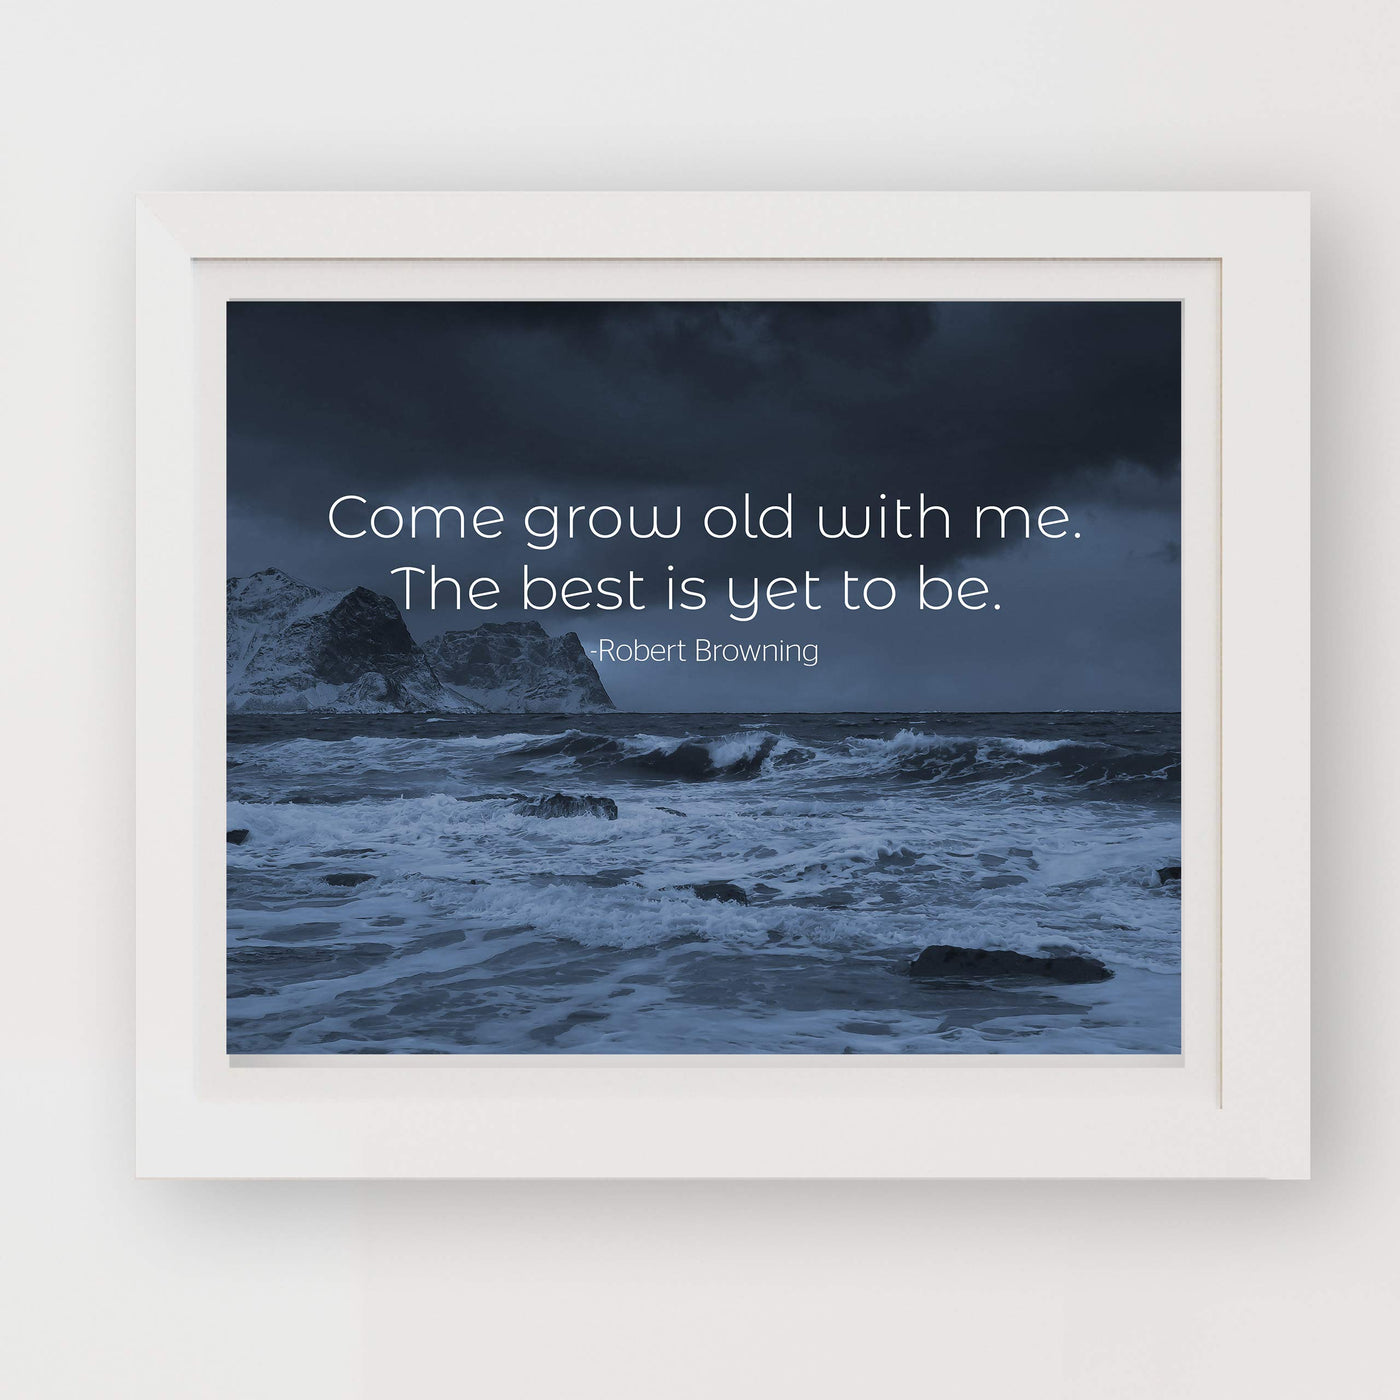 Come Grow Old With Me-The Best Is Yet To Be Poetic Quotes Wall Art -10x8" Inspirational Wall Print-Ready to Frame. Quote By Robert Browning. Scenic Print for Home-Study Decor. Great Literary Gift!